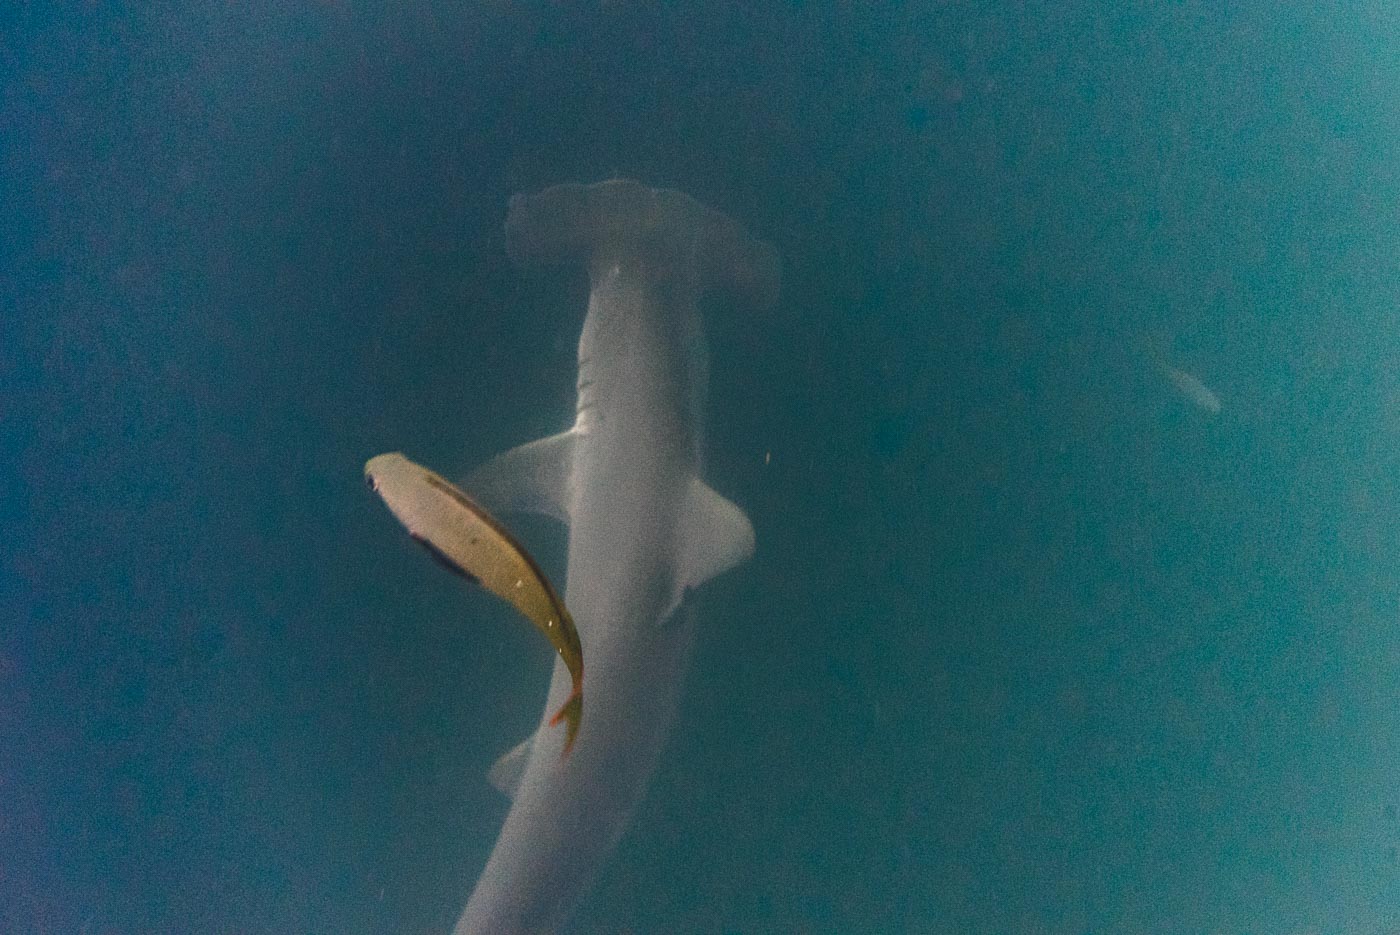 Snorkeling with a hammer head shark!